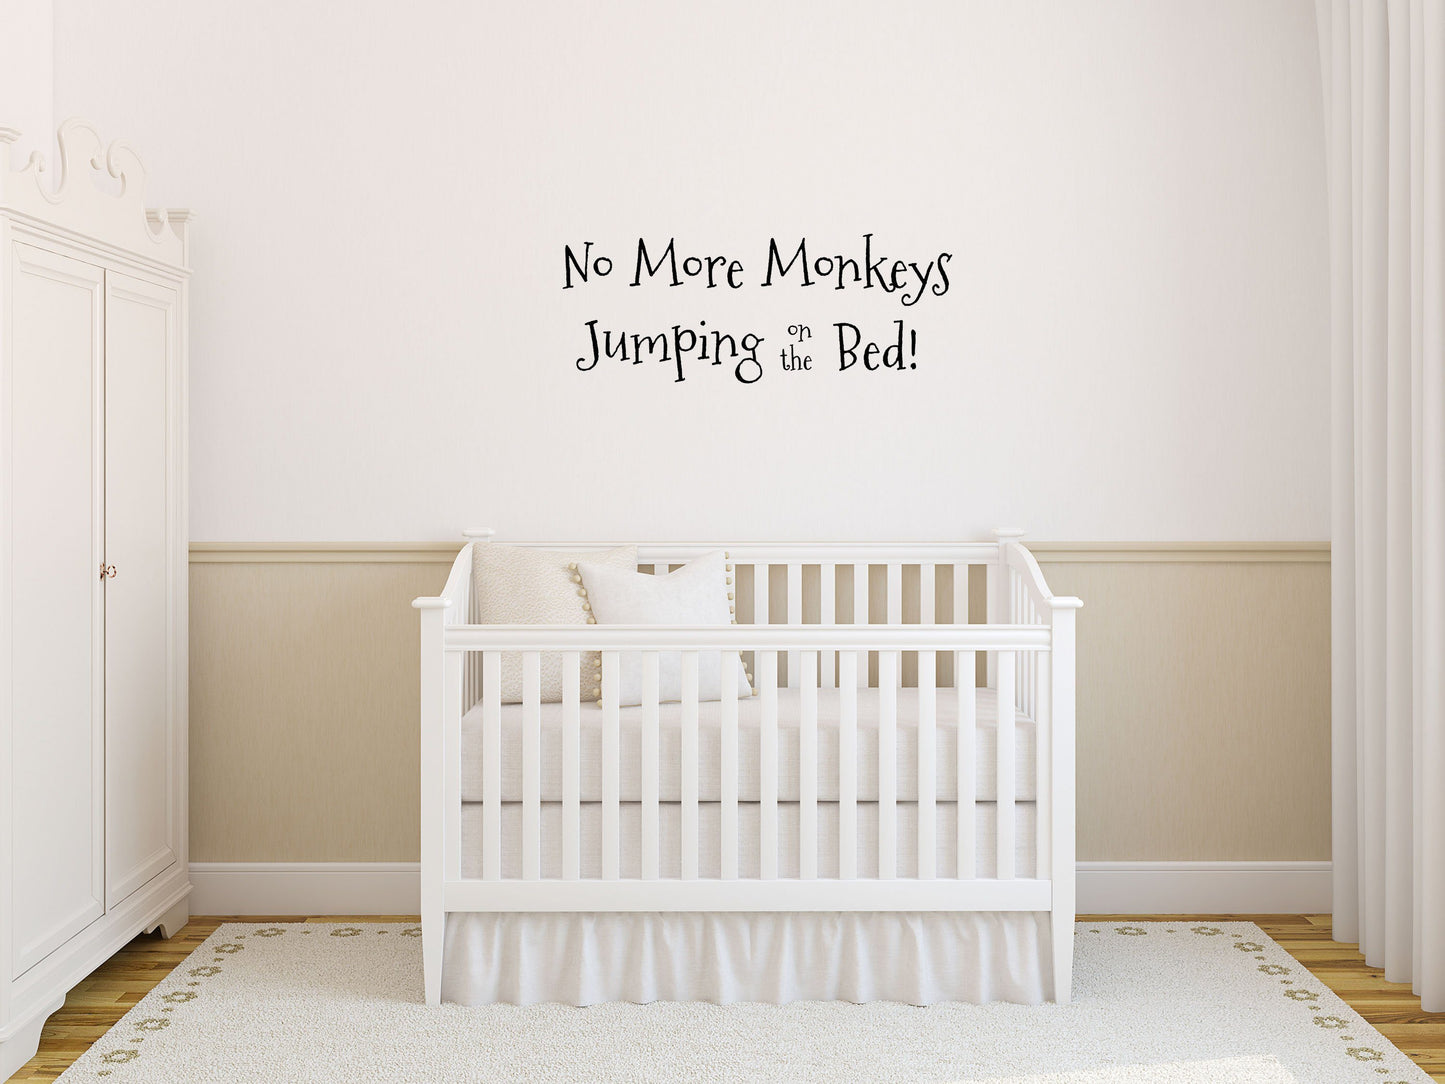 No More Monkeys Jumping on the Bed - Inspirational Wall Decals Inspirational Wall Signs 